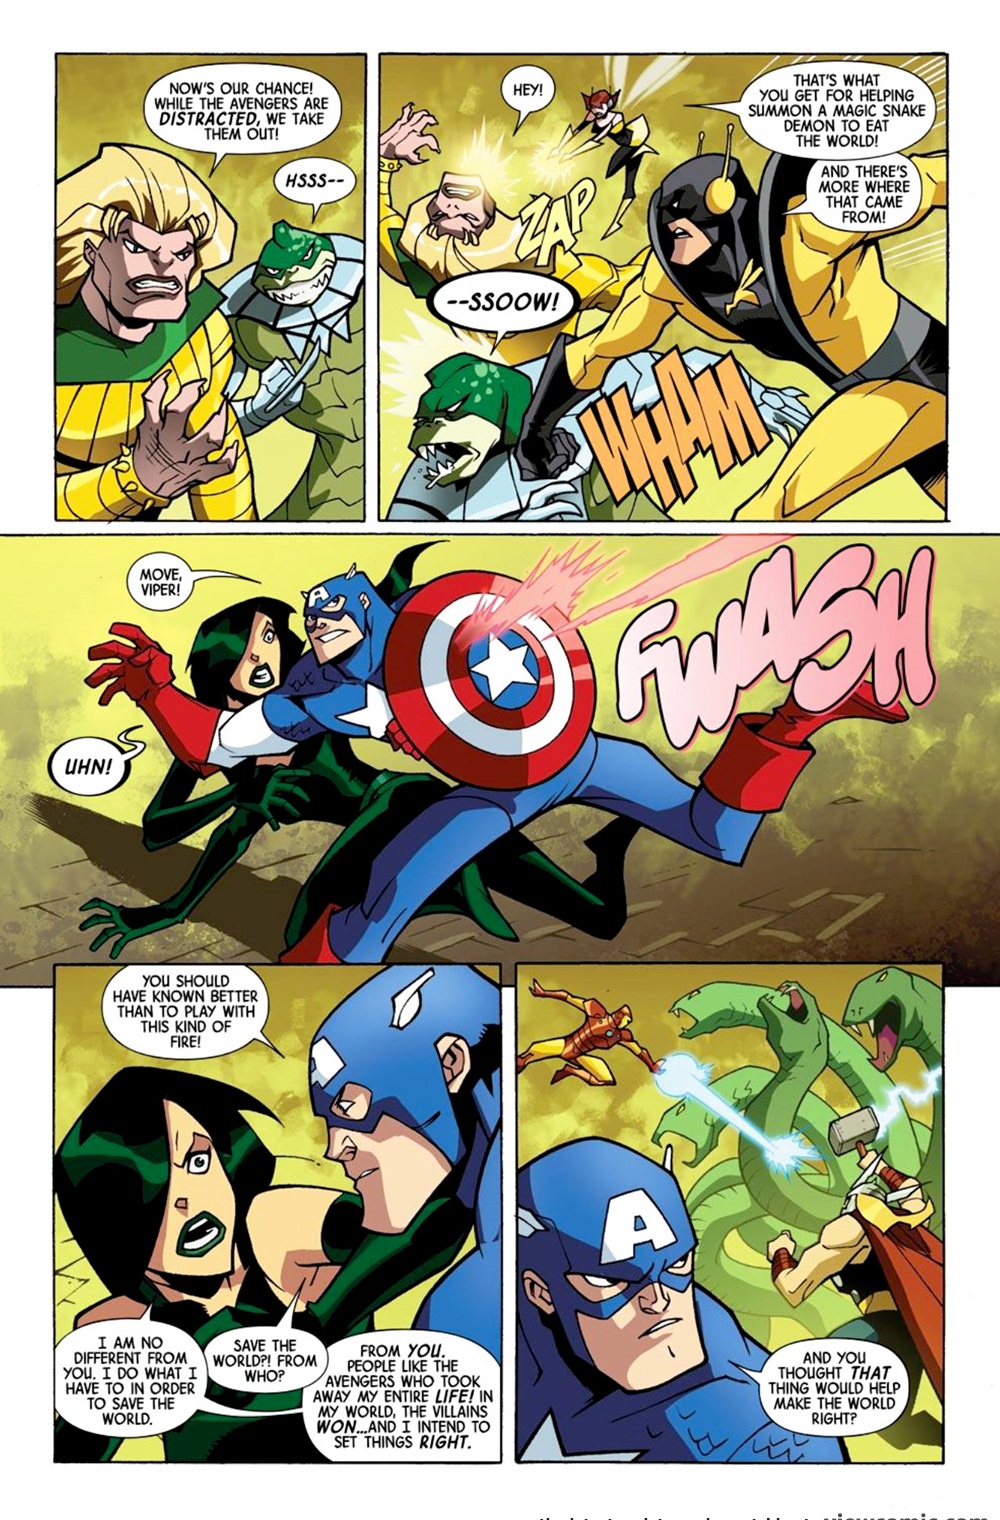 Marvel Universe Avengers Earths Mightiest Heroes 005 2012 | Read Marvel  Universe Avengers Earths Mightiest Heroes 005 2012 comic online in high  quality. Read Full Comic online for free - Read comics online in high  quality .